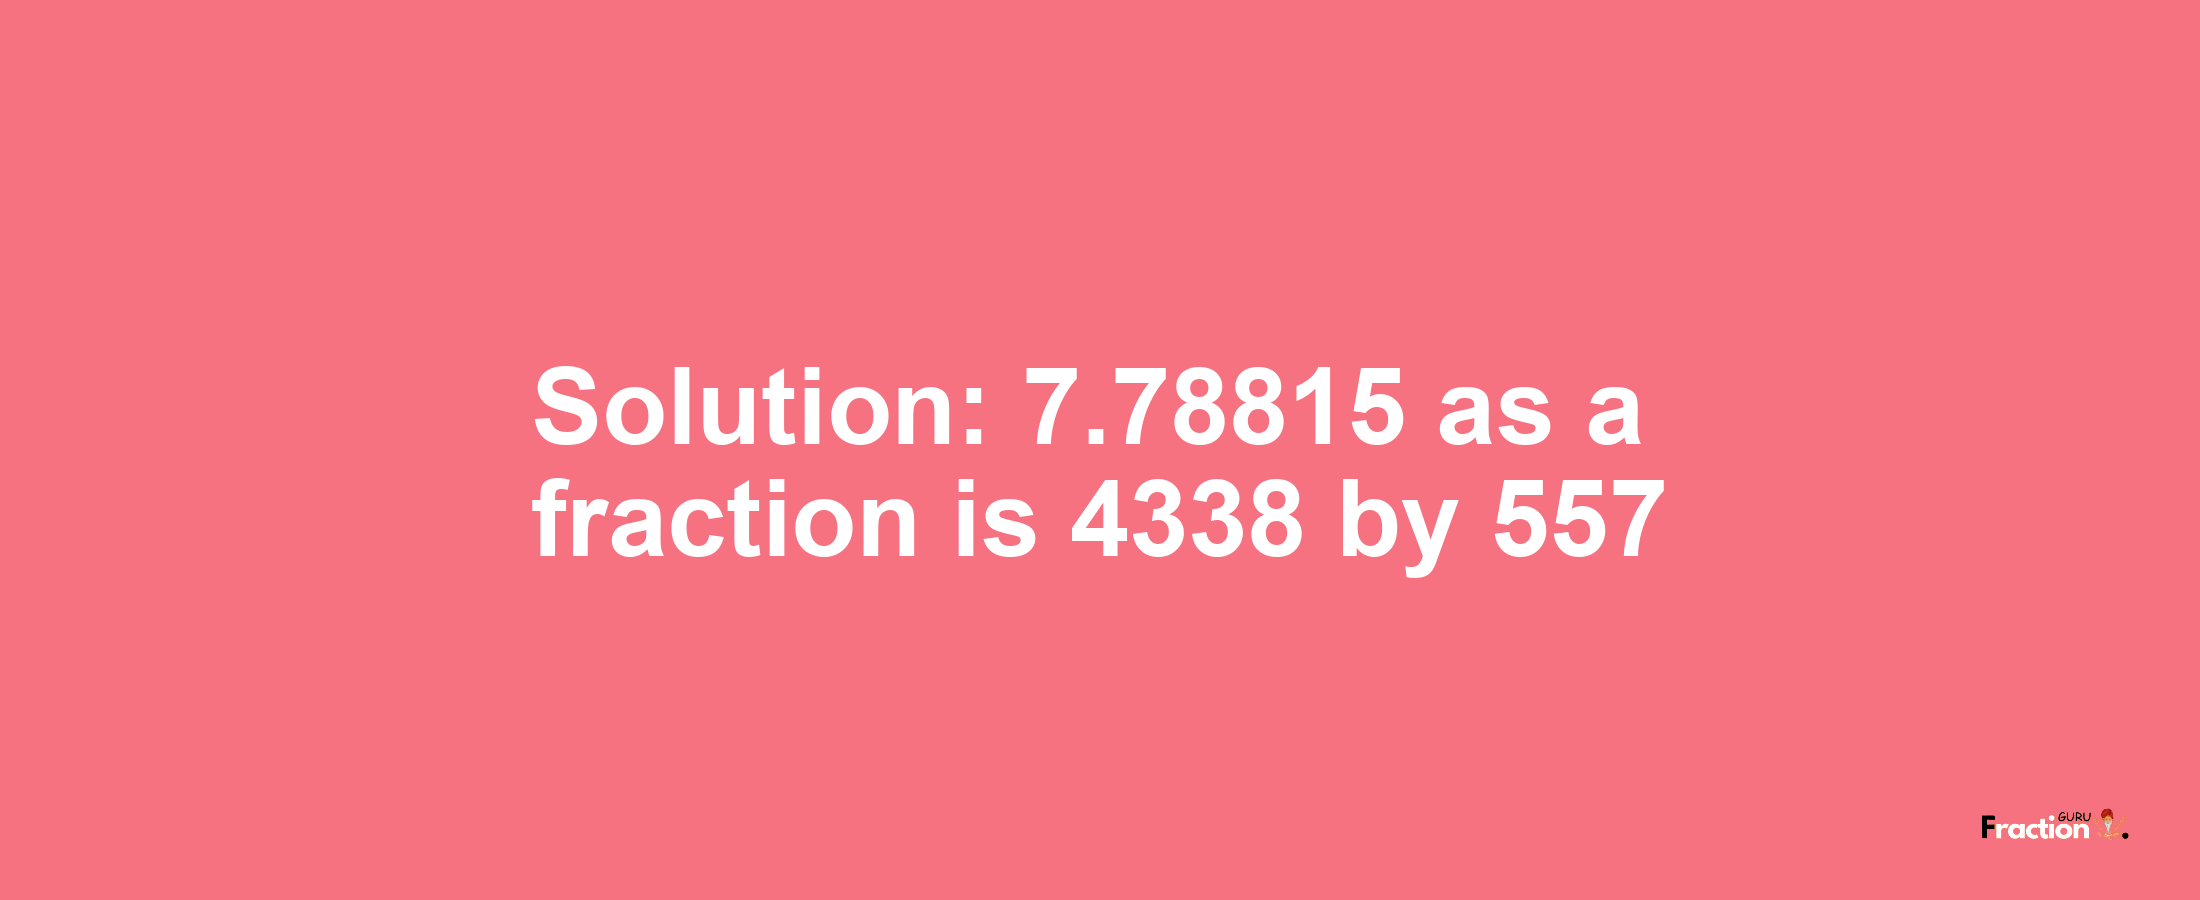 Solution:7.78815 as a fraction is 4338/557